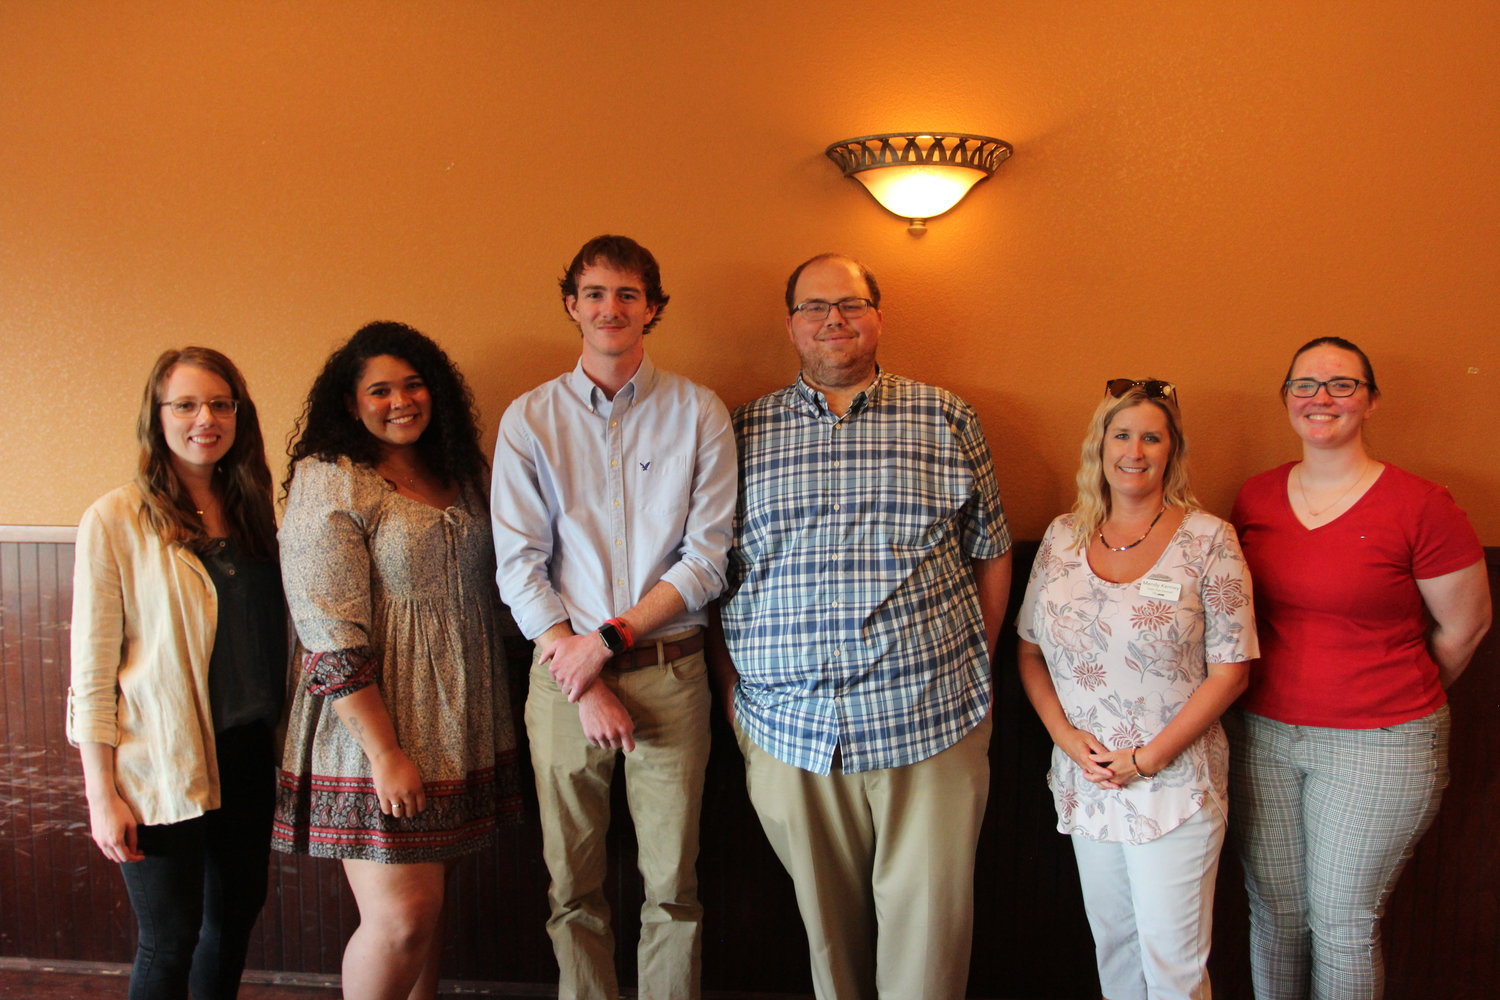 Warrensburg Star-Journal staff pose for a photo after the 2022 Best of the ‘Burg reception Thursday, July 28. From left, Editor Nicole Cooke, Reporter Meliyah Venerable, Intern Dillon Seckington, Sports Editor Joe Andrews, Sales Consultant Mendy Kenney and Reporter Sara Lawson.